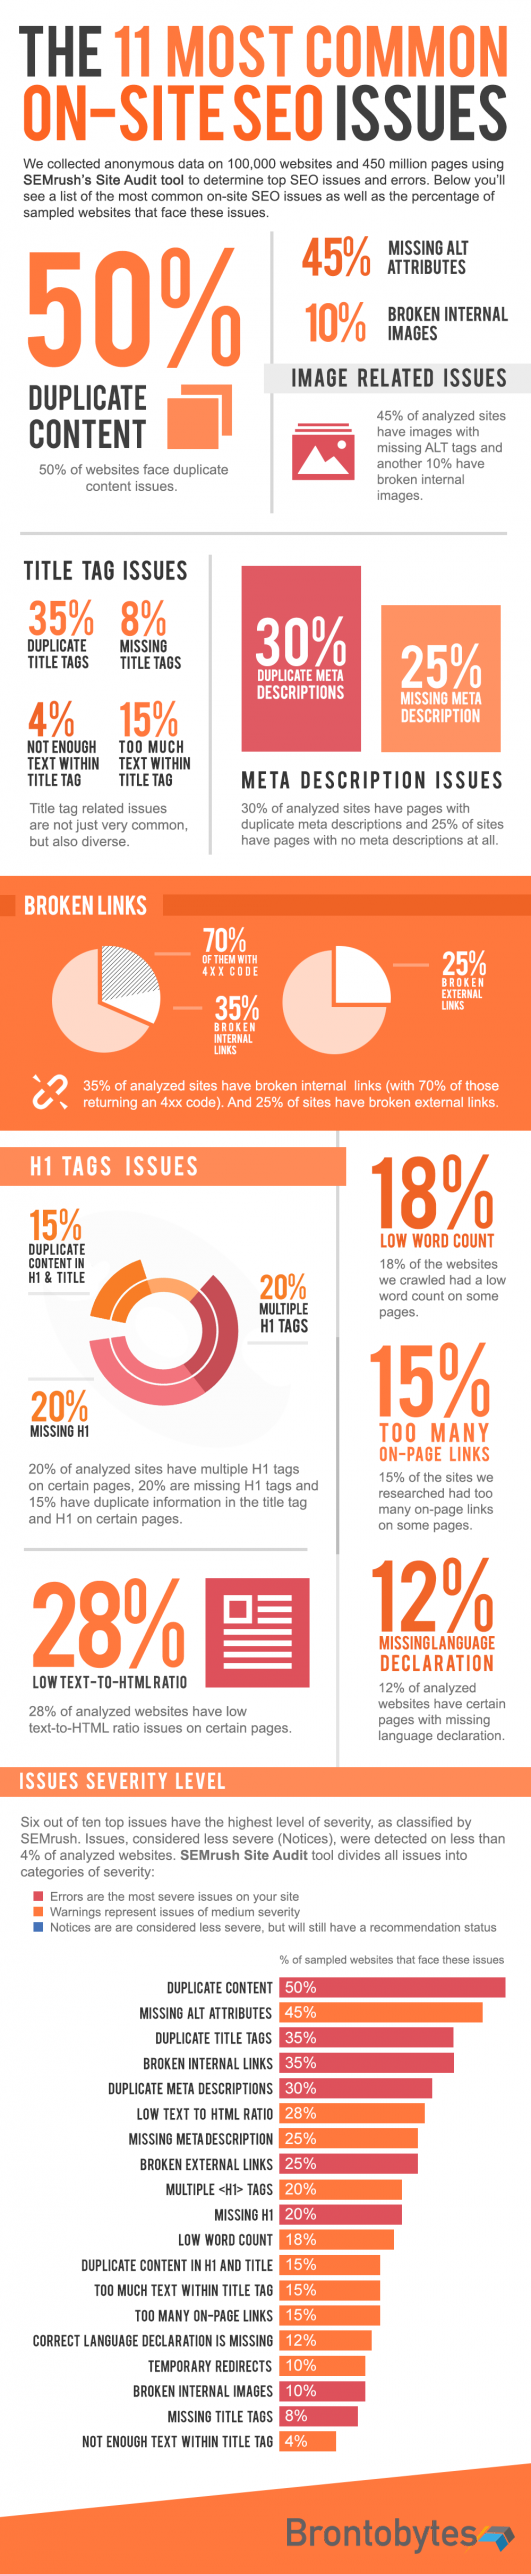 10+1 common SEO issues infographic